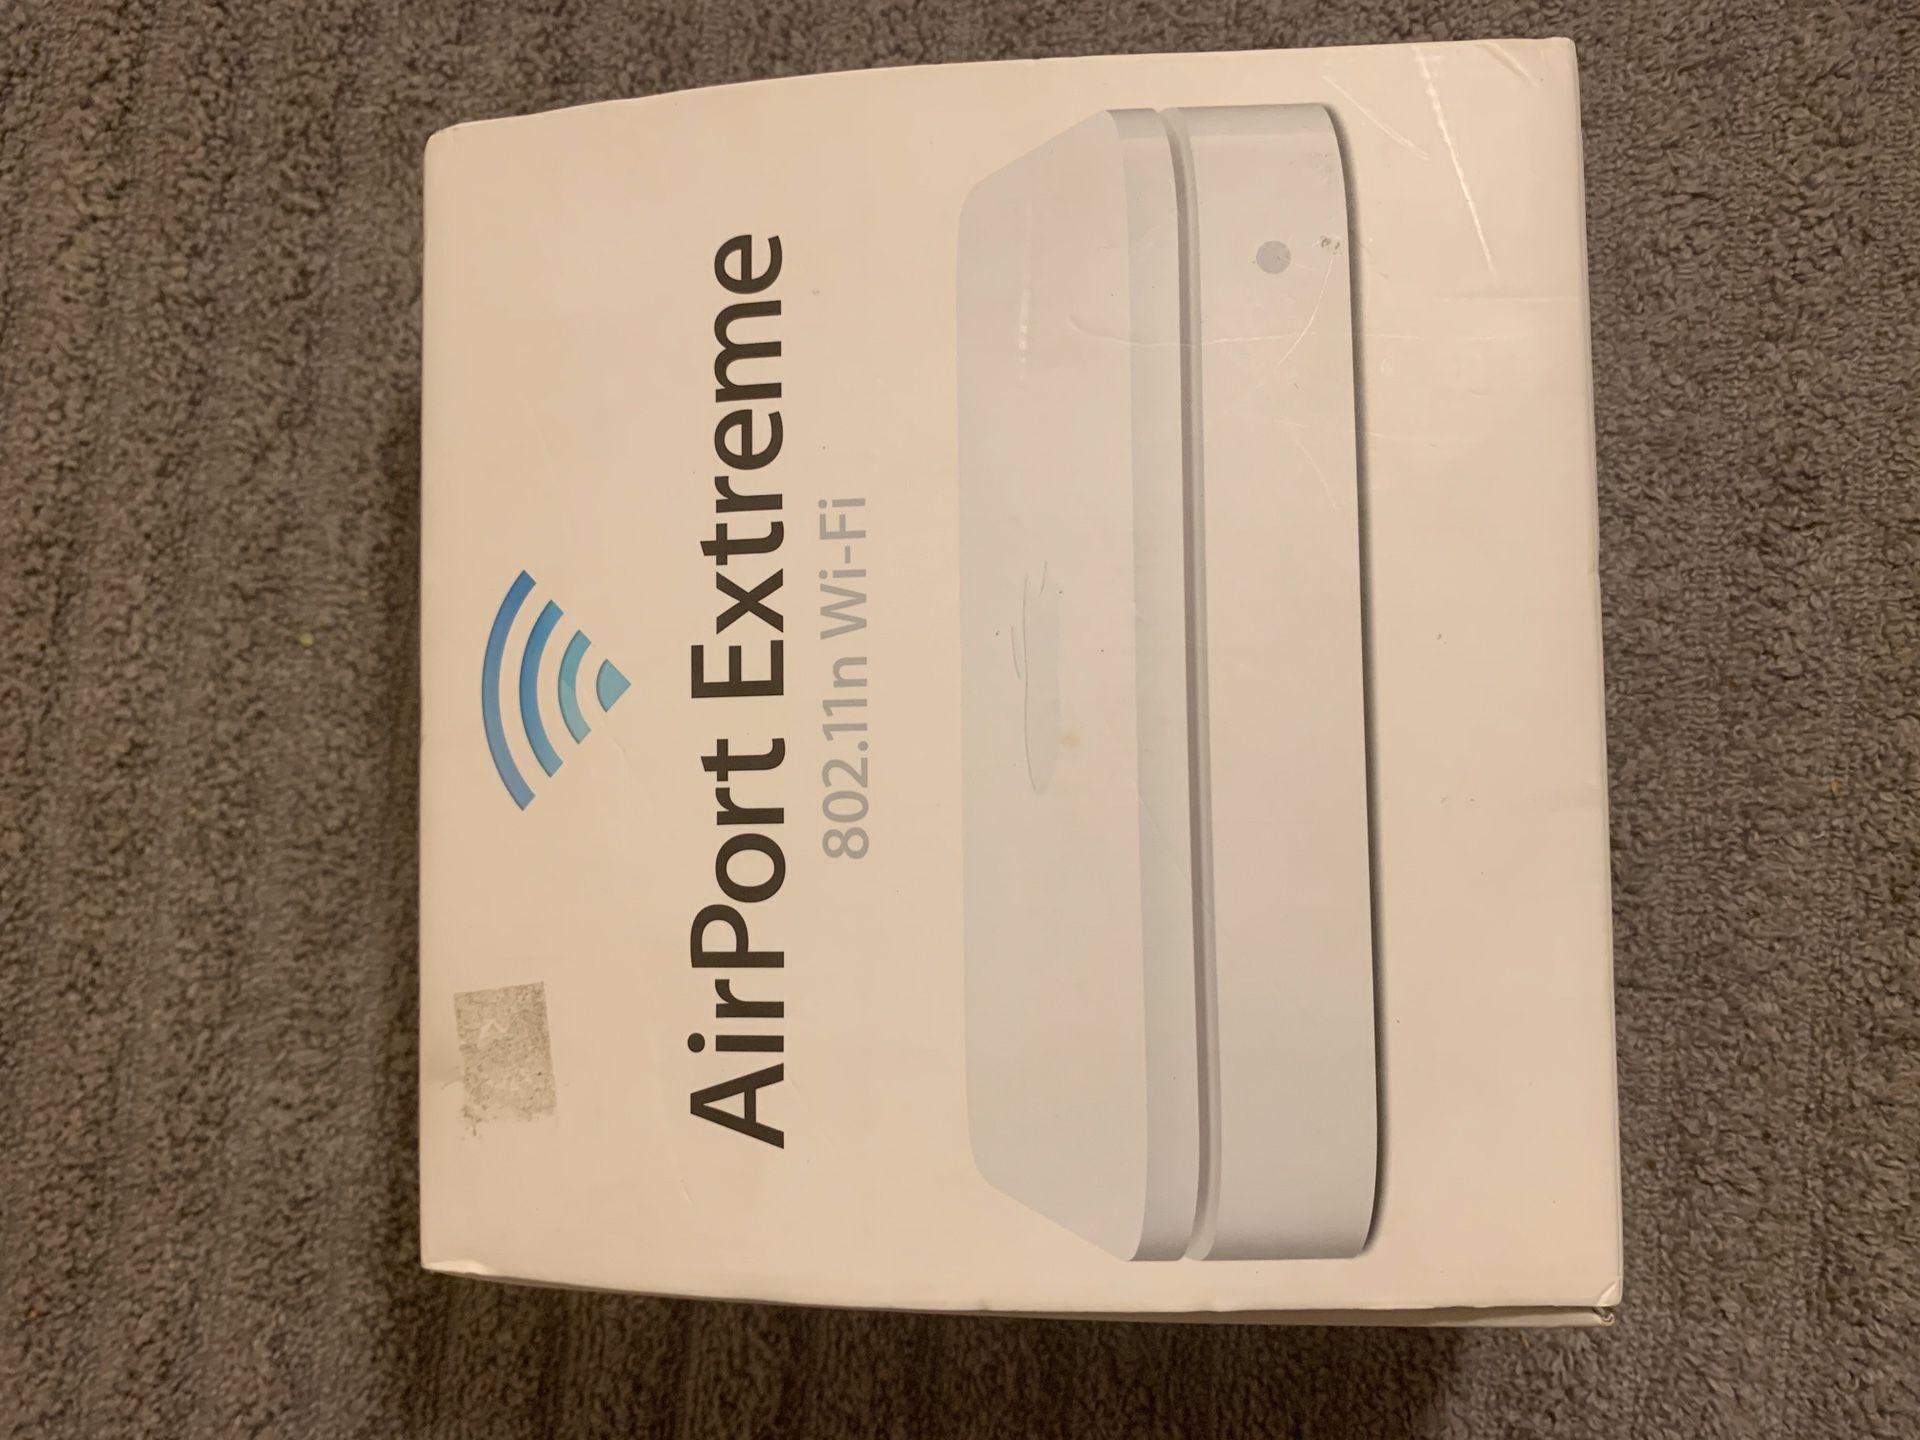 Apple AirPort Extreme model a1354